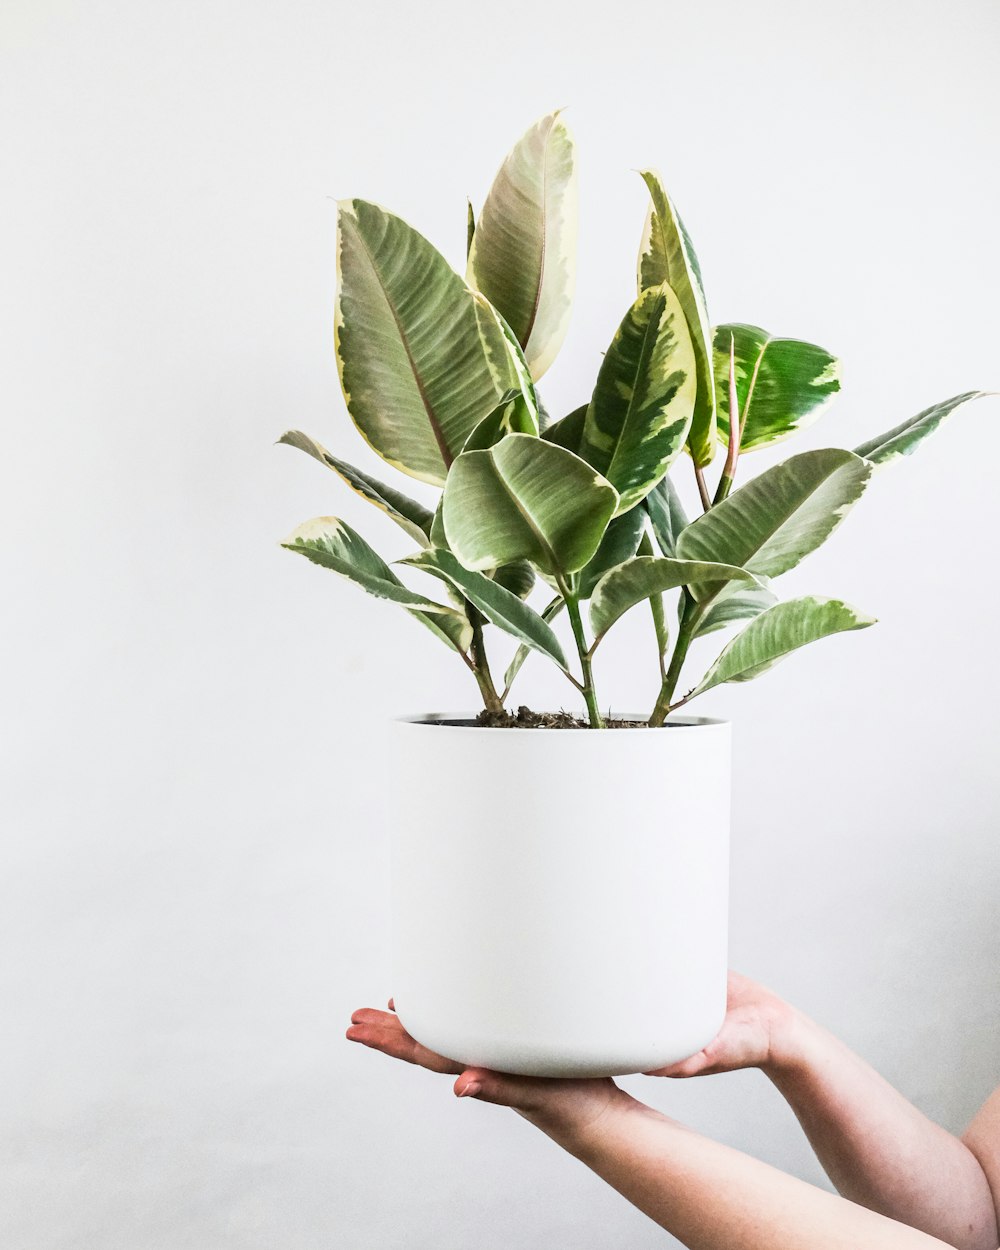 person holding white ceramic pot with green plant